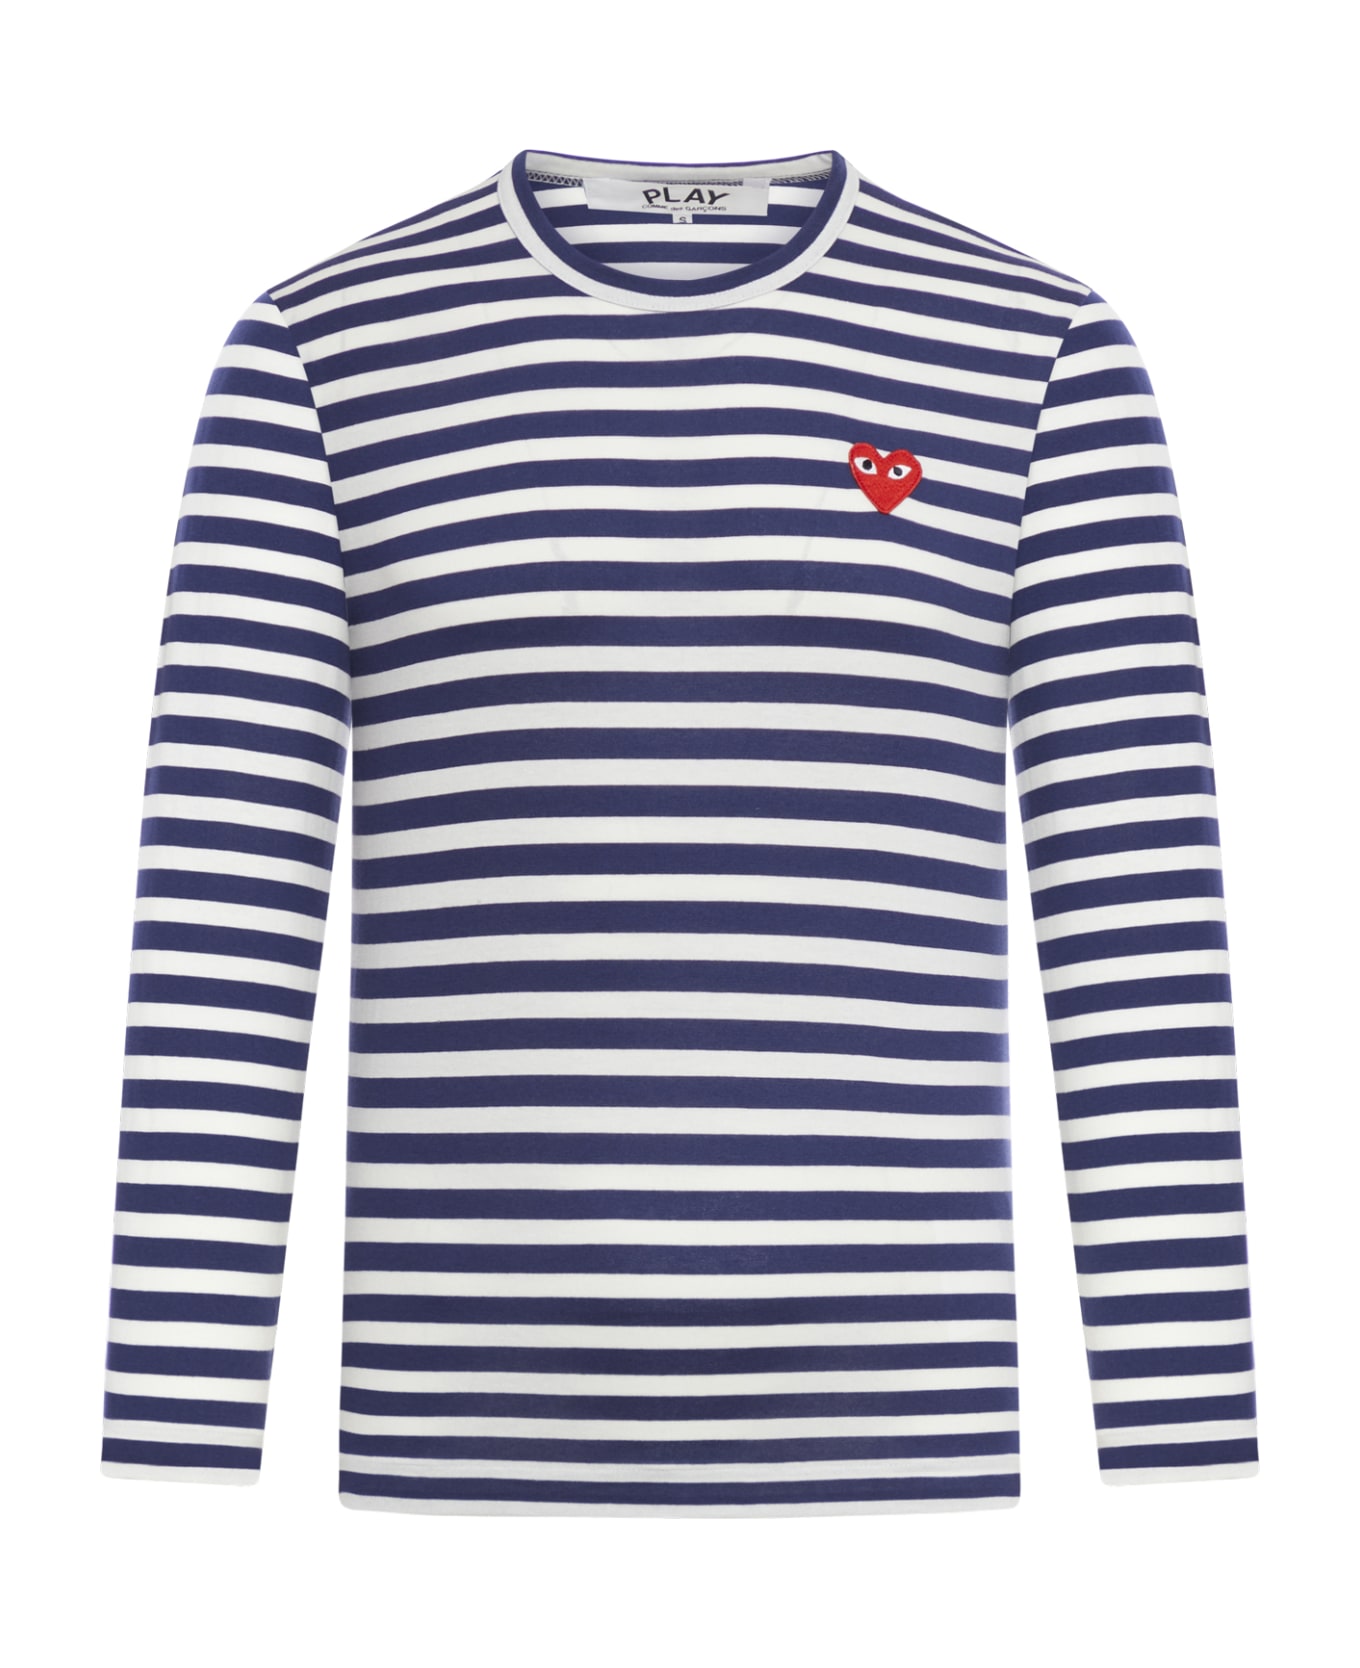 Comme des Garçons Play Play Striped T-shirt Red Heart - Navy White